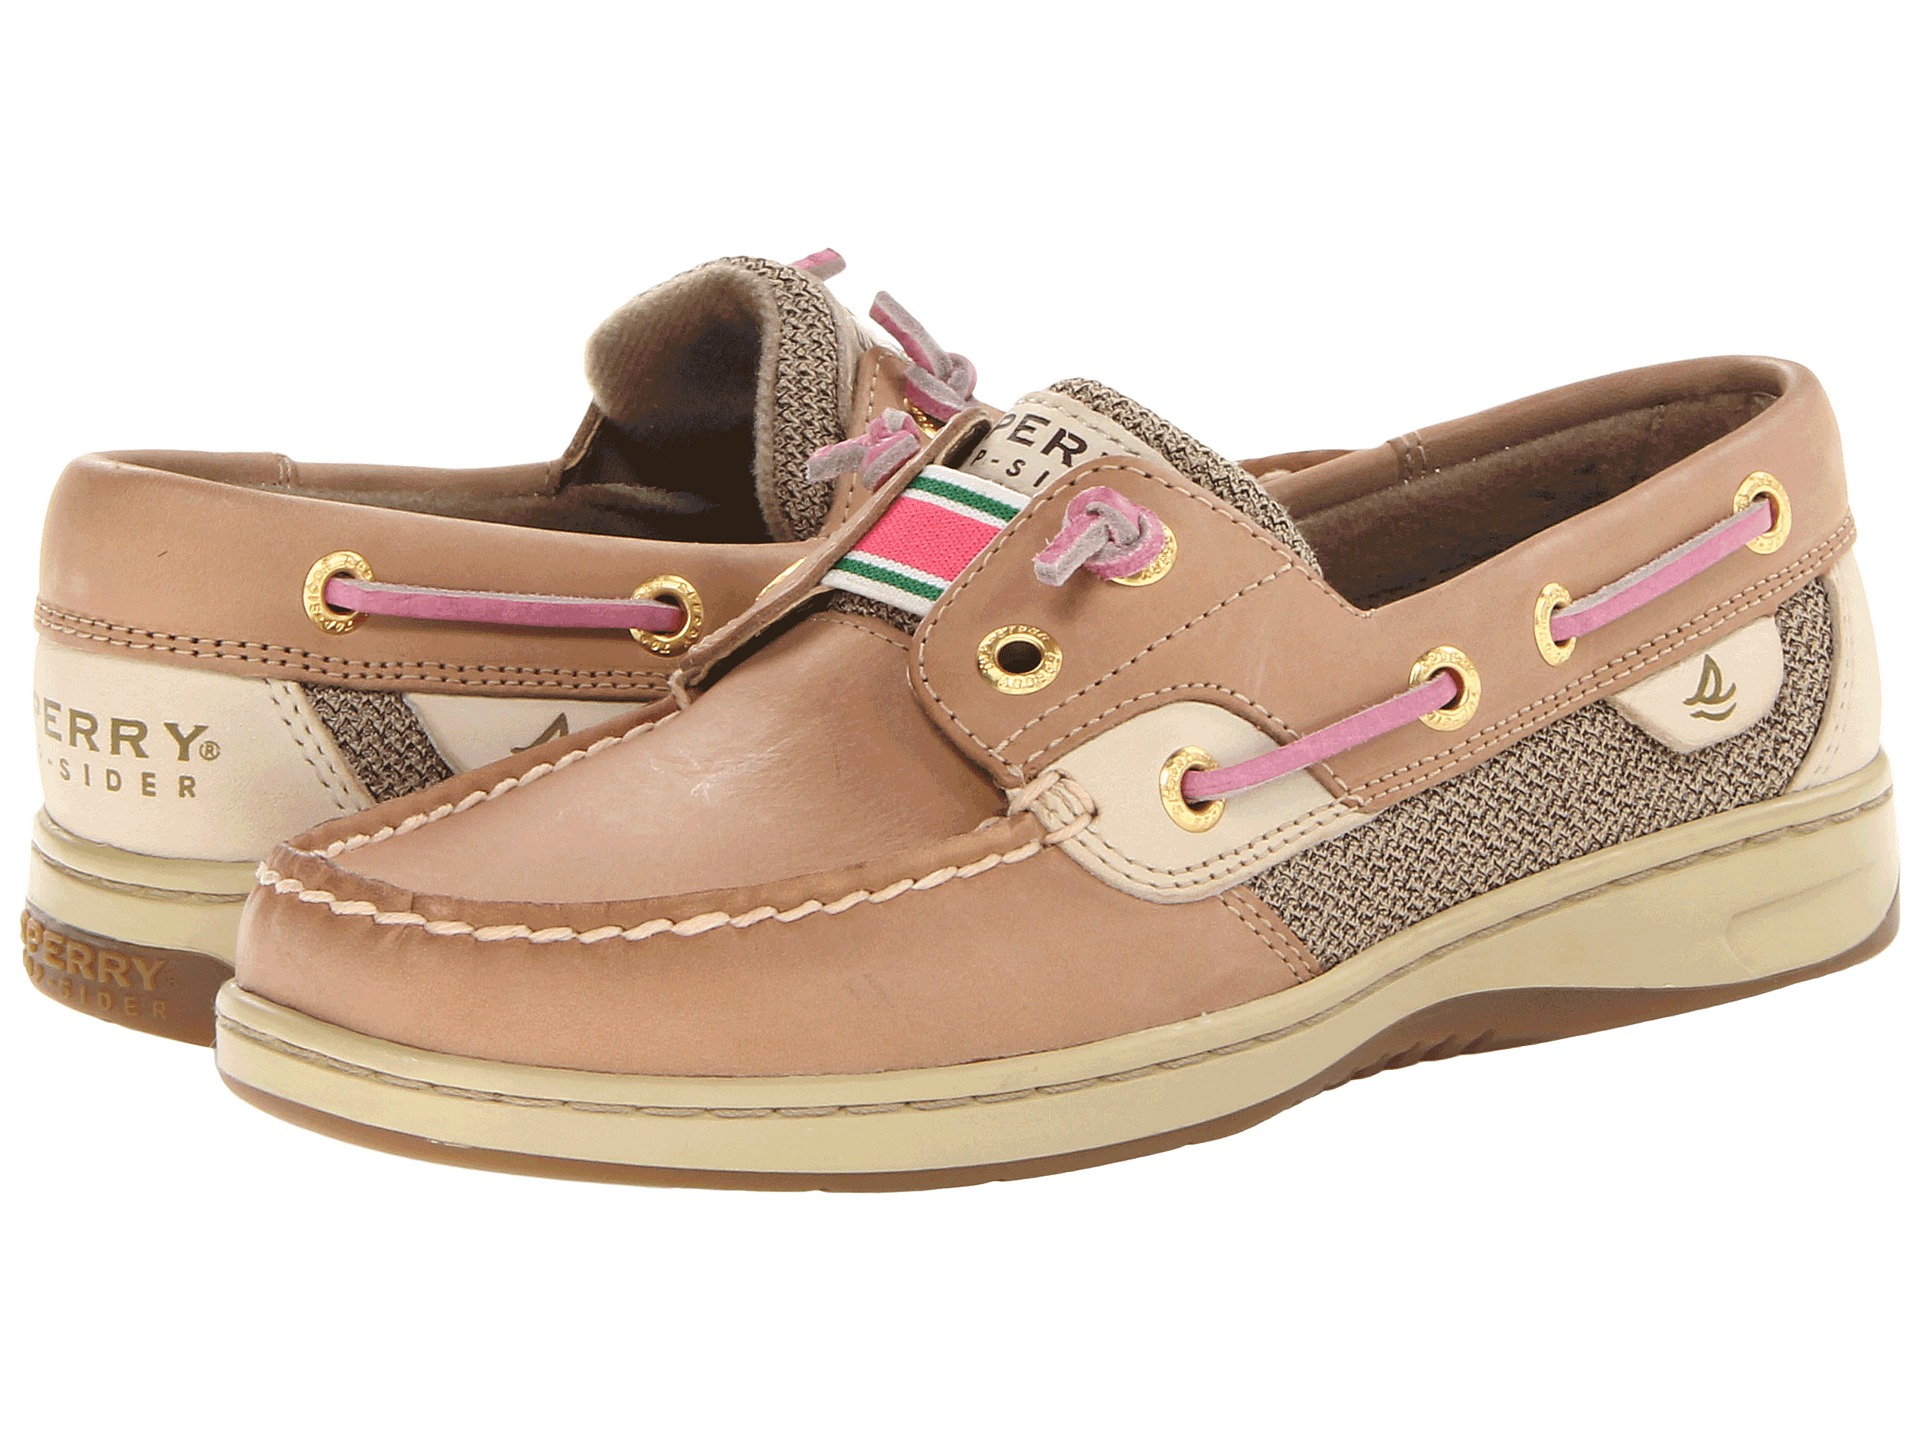 Sperry Top Sider Rainbow Slip On Boat Shoe | Shipped Free at Zappos